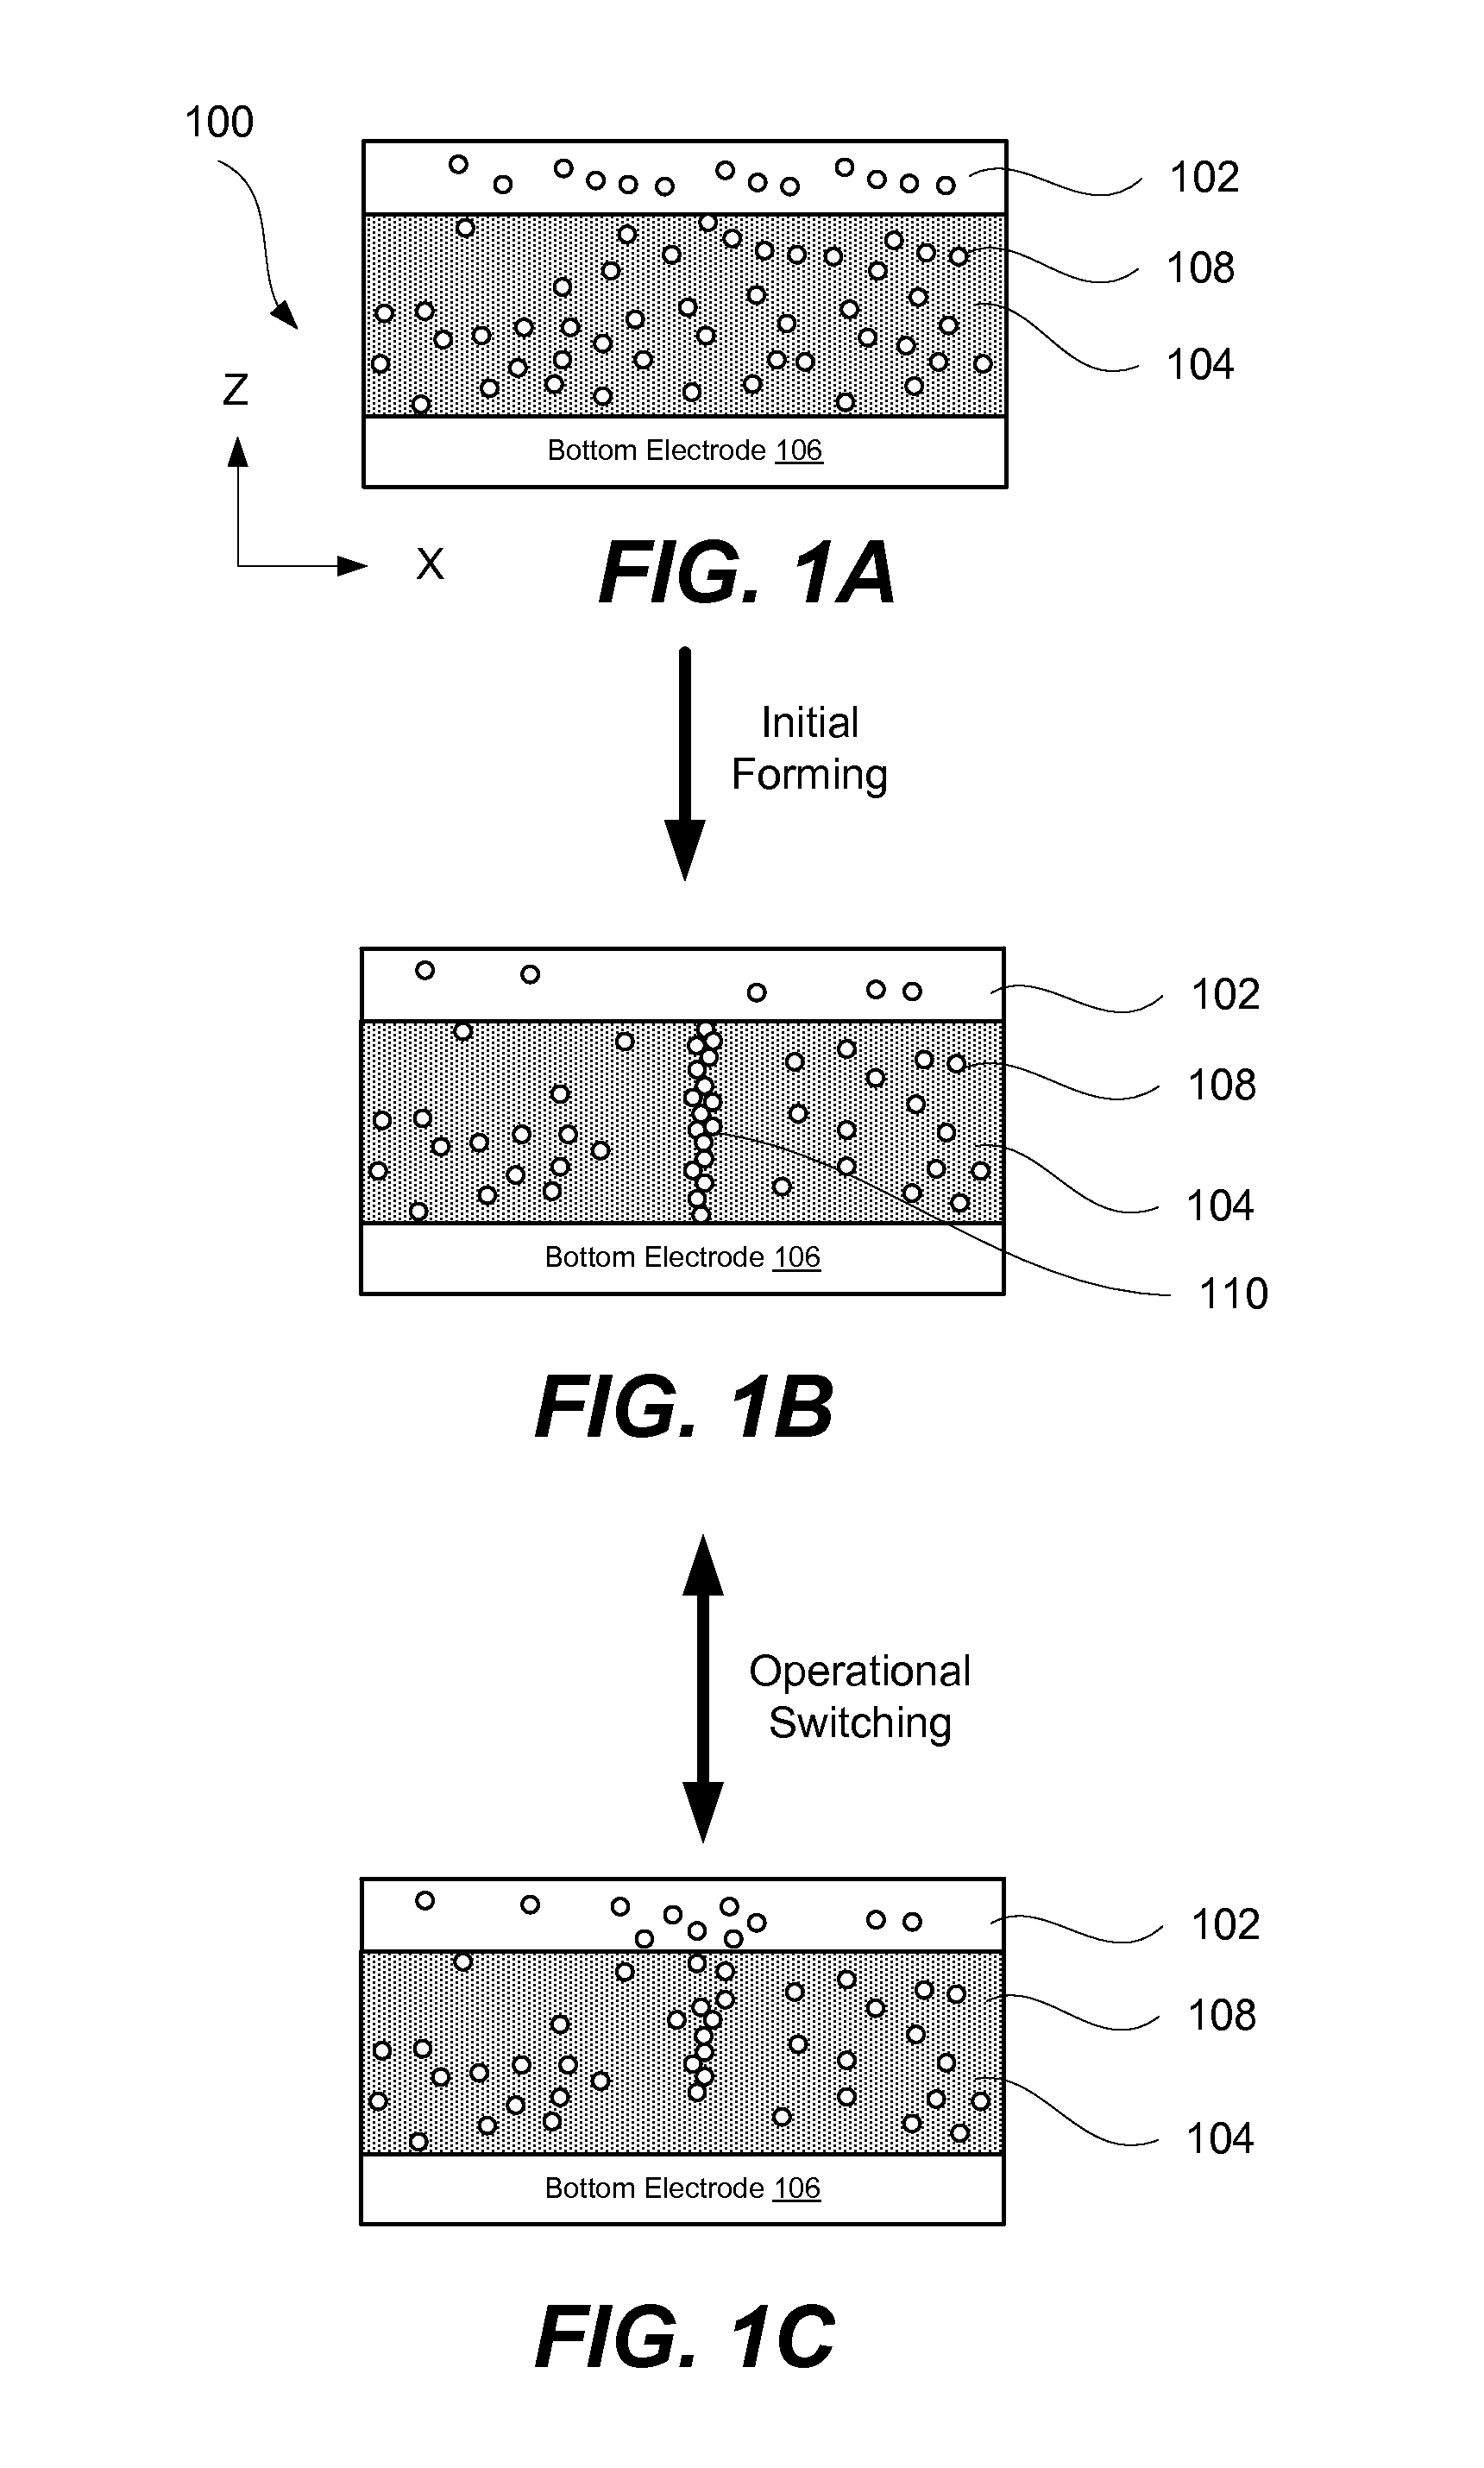 Method for Improving Data Retention of ReRAM Chips Operating at Low Operating Temperatures